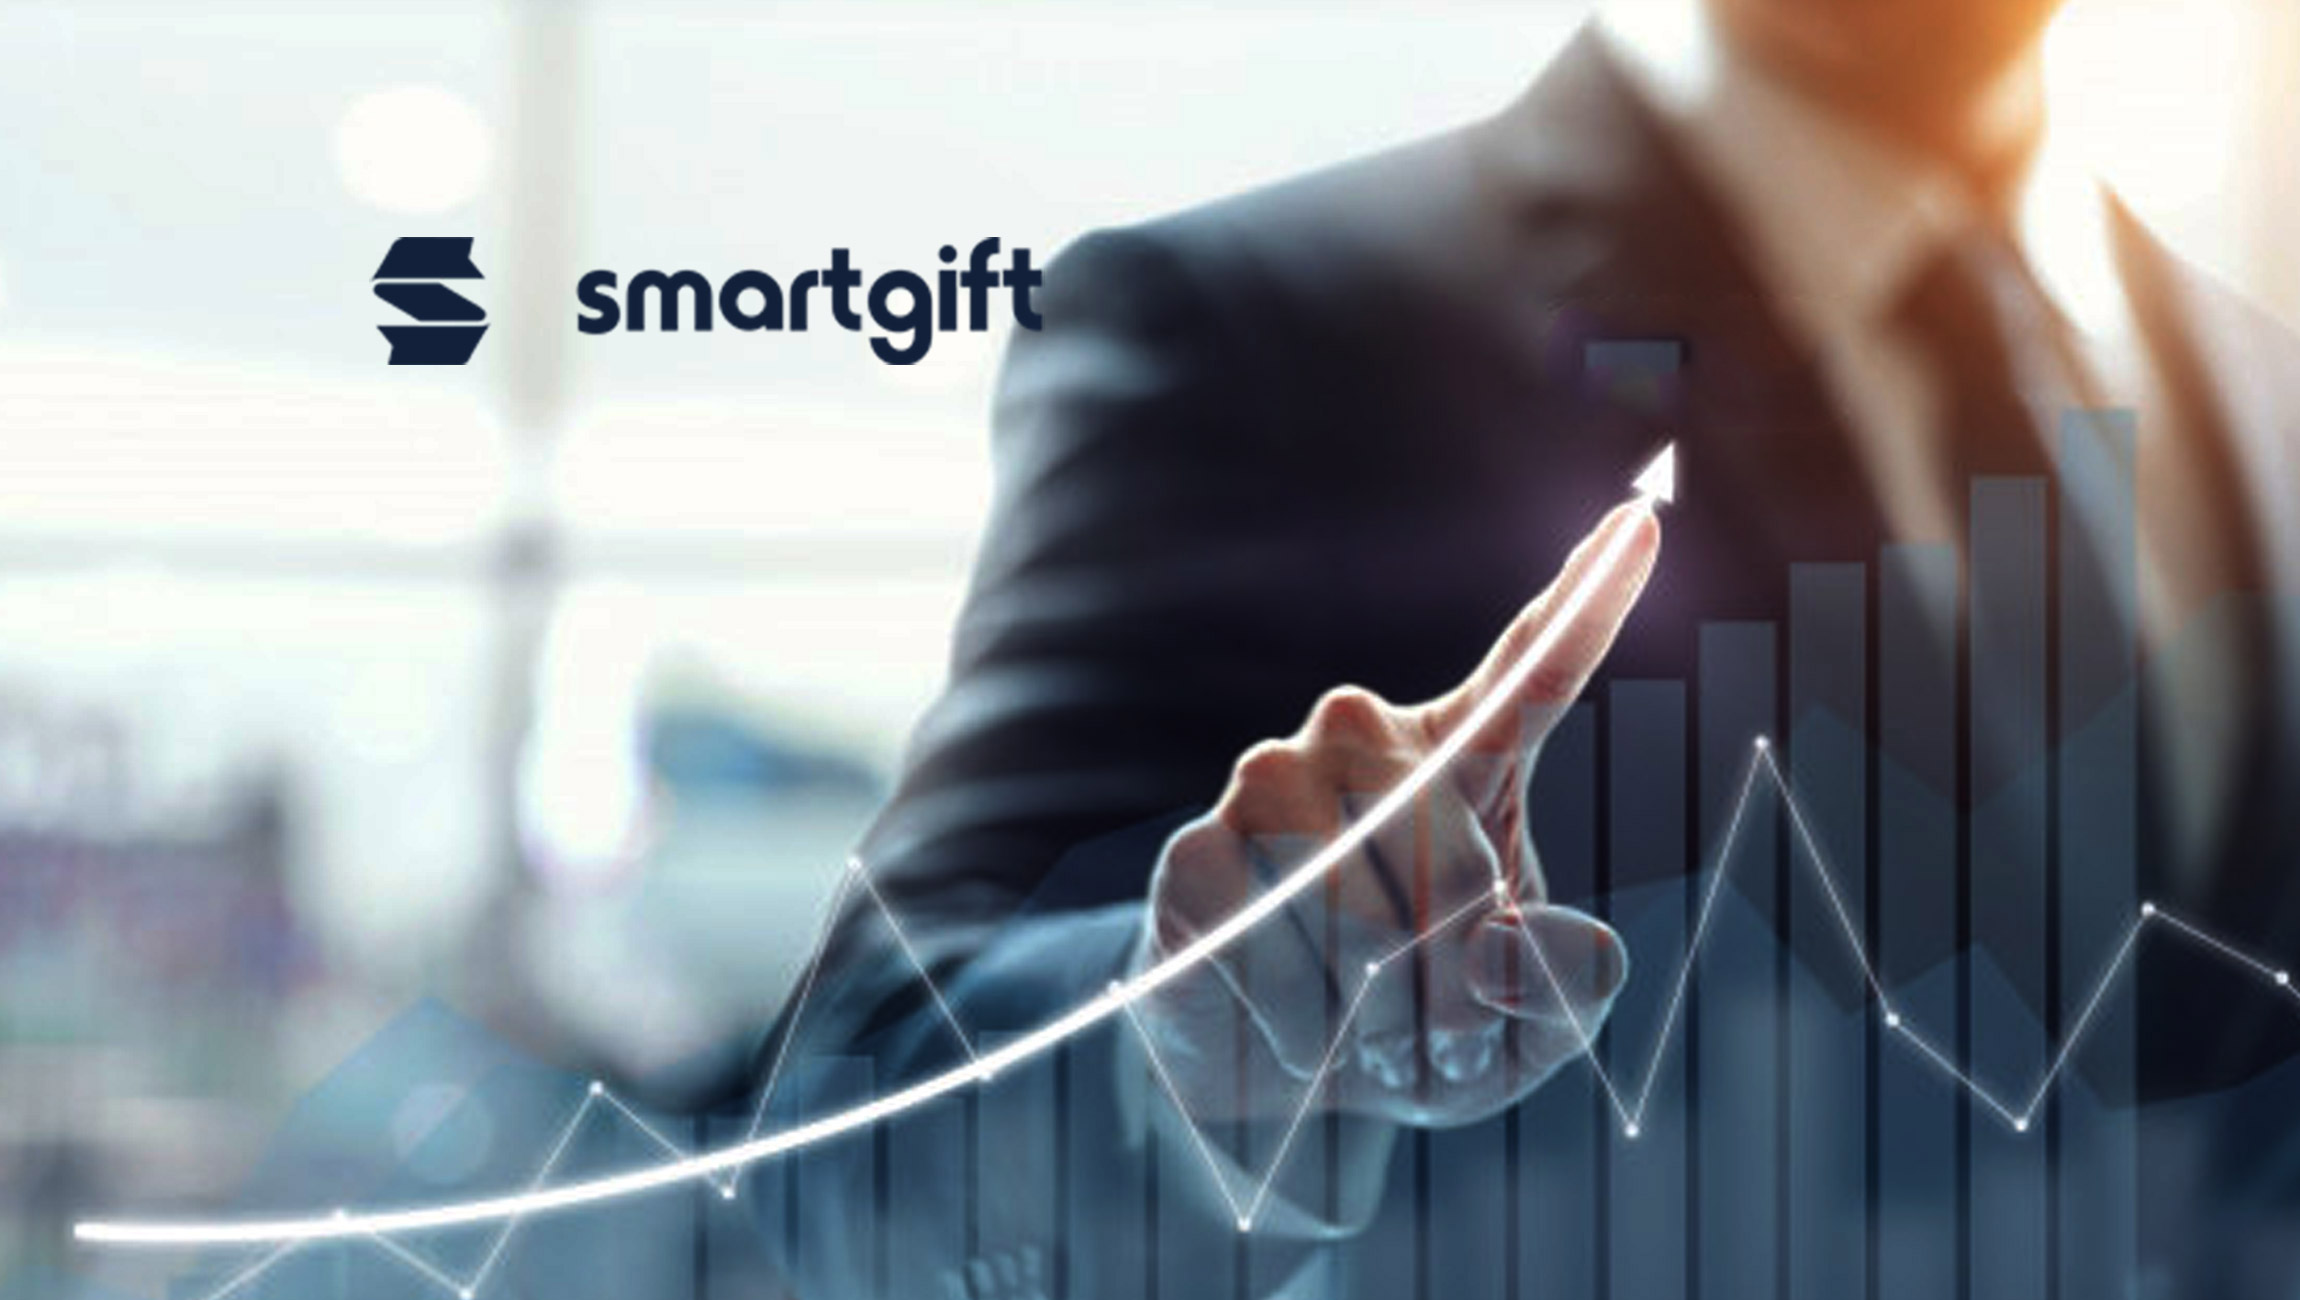 SmartGift-Accelerates-Growth_-Driven-by-New-Brand-Clients-and-Platform-Expansion-Into-Corporate-Gifting